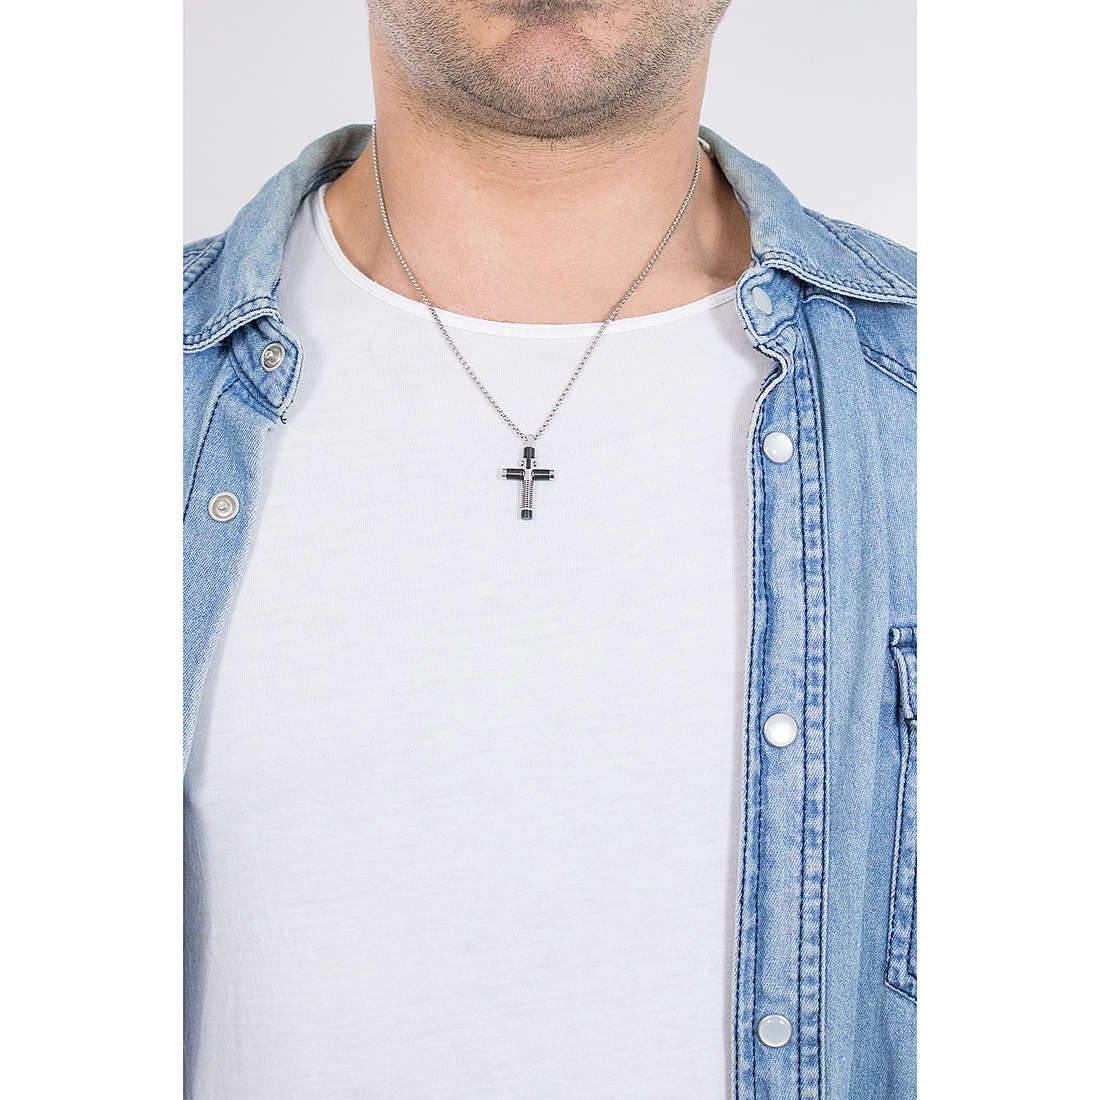 2Jewels necklaces Compact man 251600 wearing